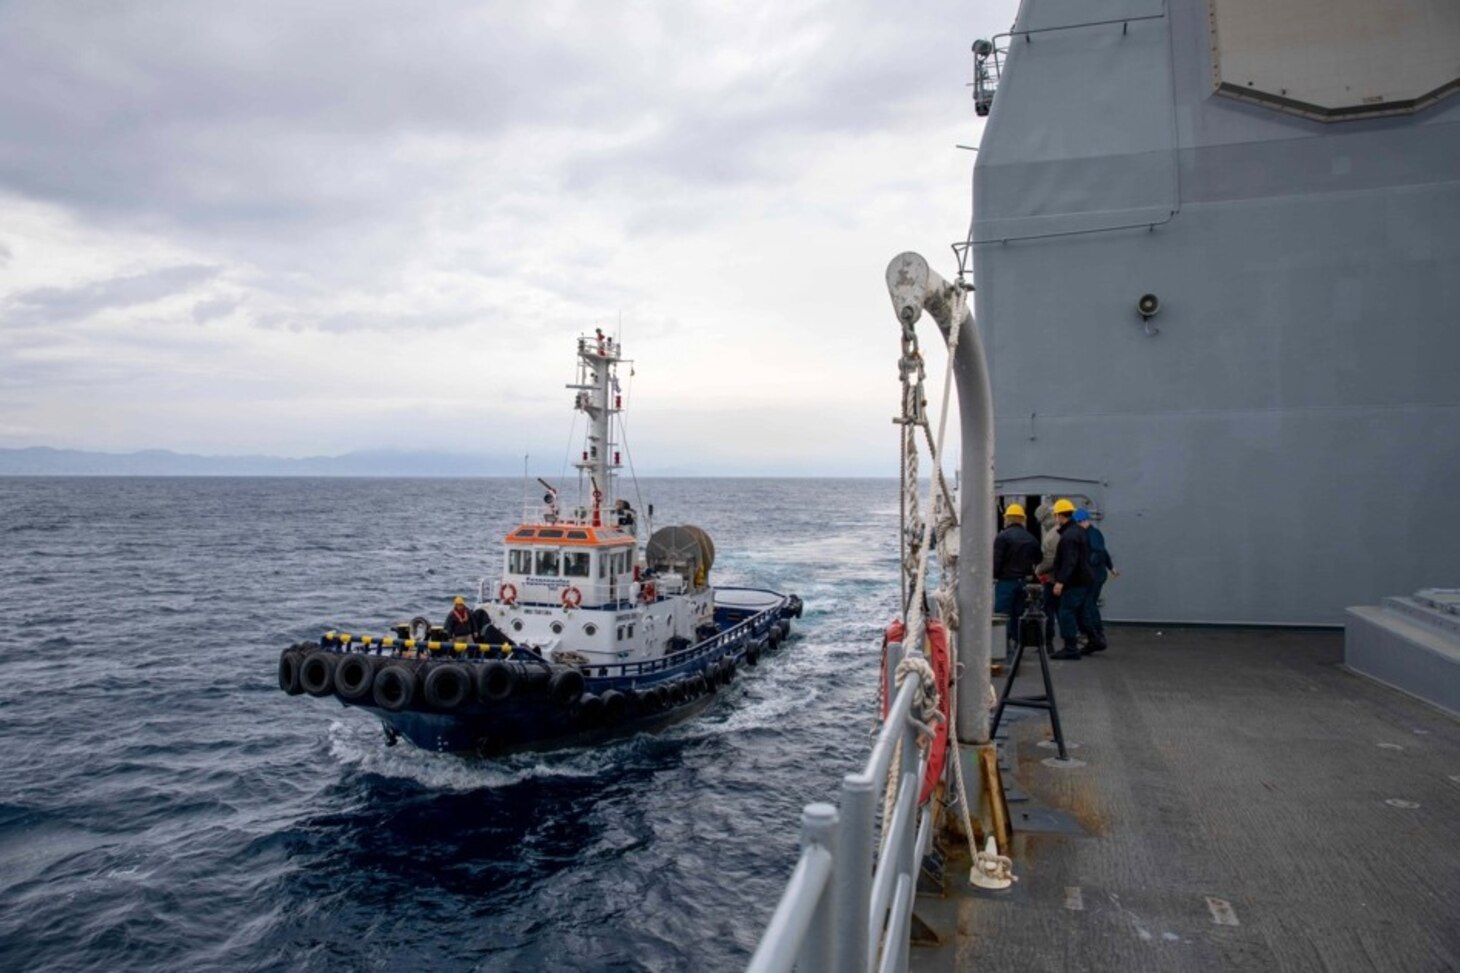 A tug boat prepares to pull the Ticonderoga-class guided-missile cruiser USS Leyte Gulf (CG 55) into port as the ship arrives in Rhodes, Greece for a scheduled port visit, March 11, 2023. The George H.W. Bush Carrier Strike Group is on a scheduled deployment in the U.S. Naval Forces Europe area of operations, employed by U.S. Sixth Fleet to defend U.S., allied, and partner interests.